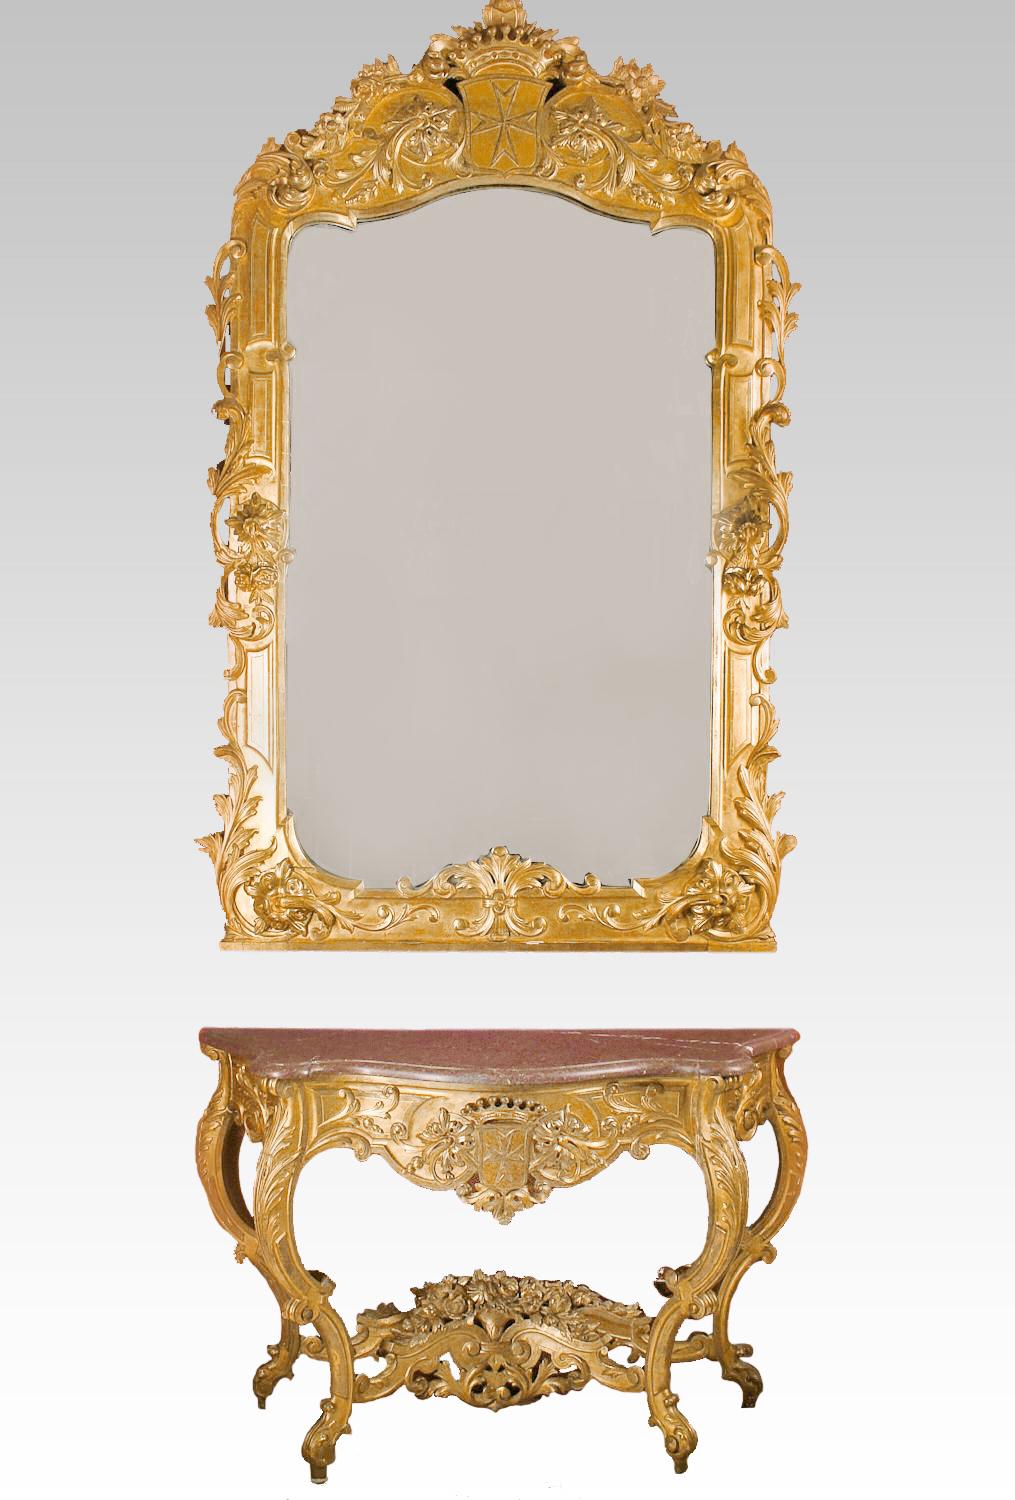 Magnificent Large 19th century Italian Rococo style carved giltwood console and mirror for the Maltese market. 
The beautifully gilt mirror is topped with a royal crown over a maltese armodial crest above large plate and bordered with scrolling